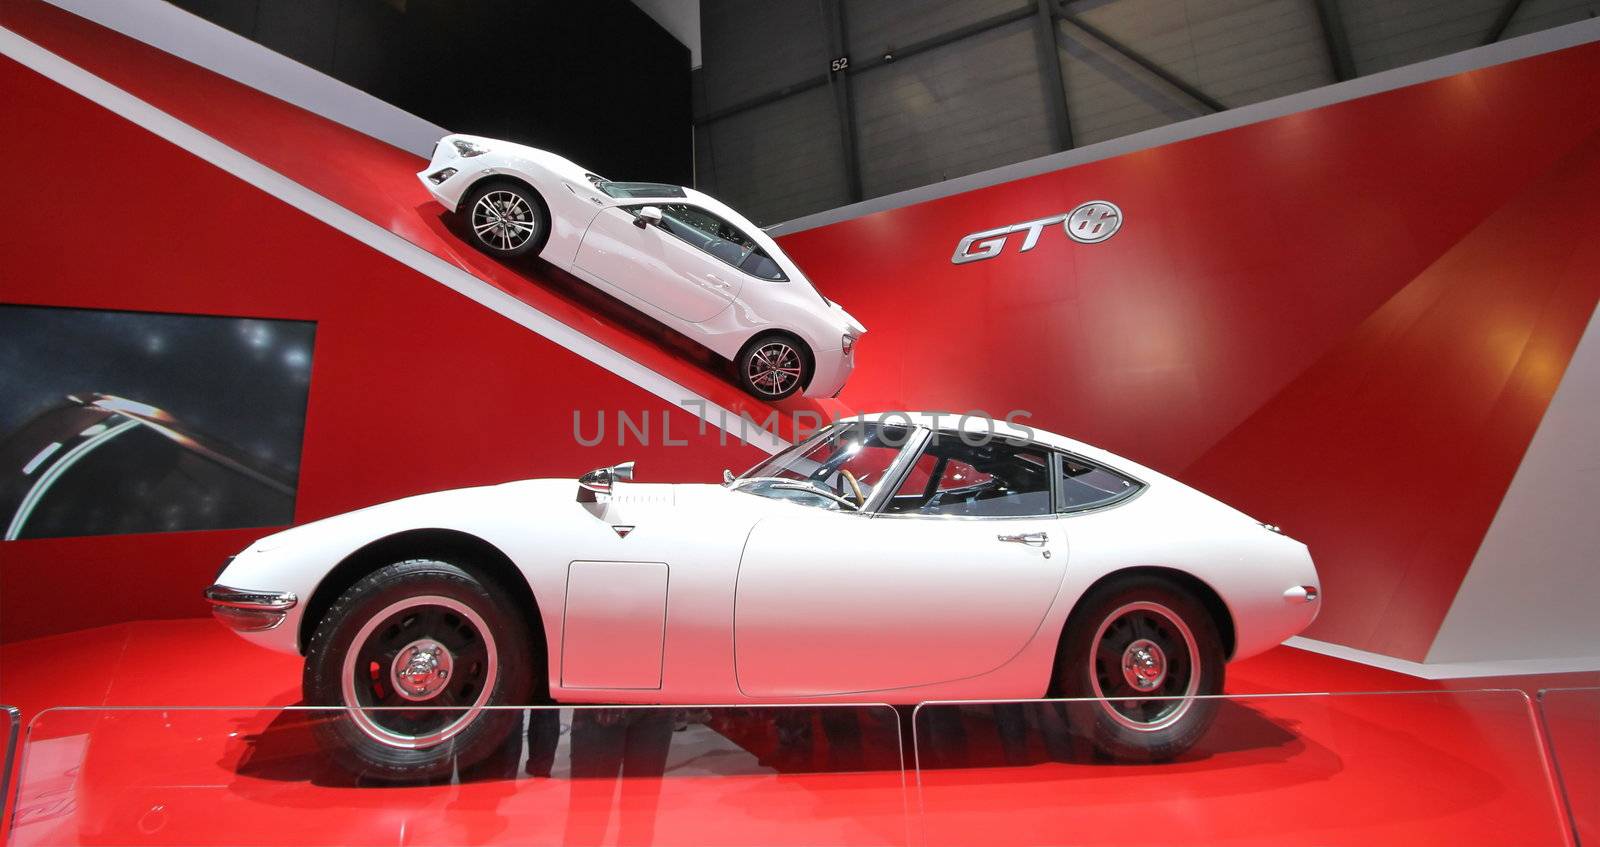 Two white Toyota 2000 GT by Elenaphotos21